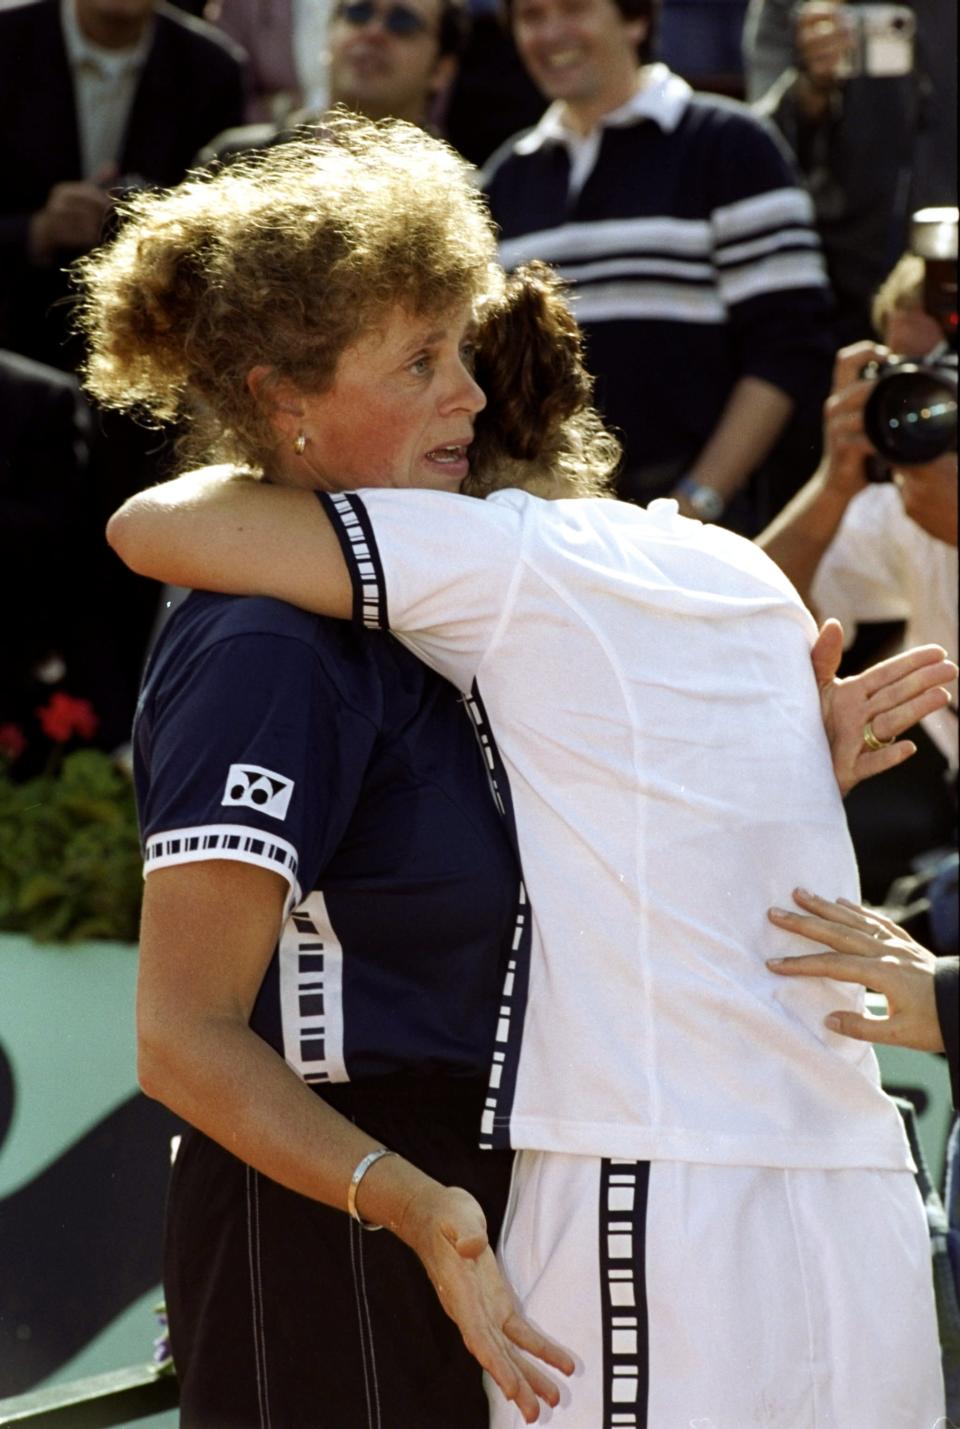 Martina Hingis of Switzerland is consoled by her mother after being defeated during the 1999 French Open Final match against Steffi Graf of Germany played at Roland Garros in Paris, France. The match finished with Steffi Graf of Germany clinching the title after a dramatic comeback 4-6, 7-5, 6-2. \ Mandatory Credit: Stu Forster /Allsport